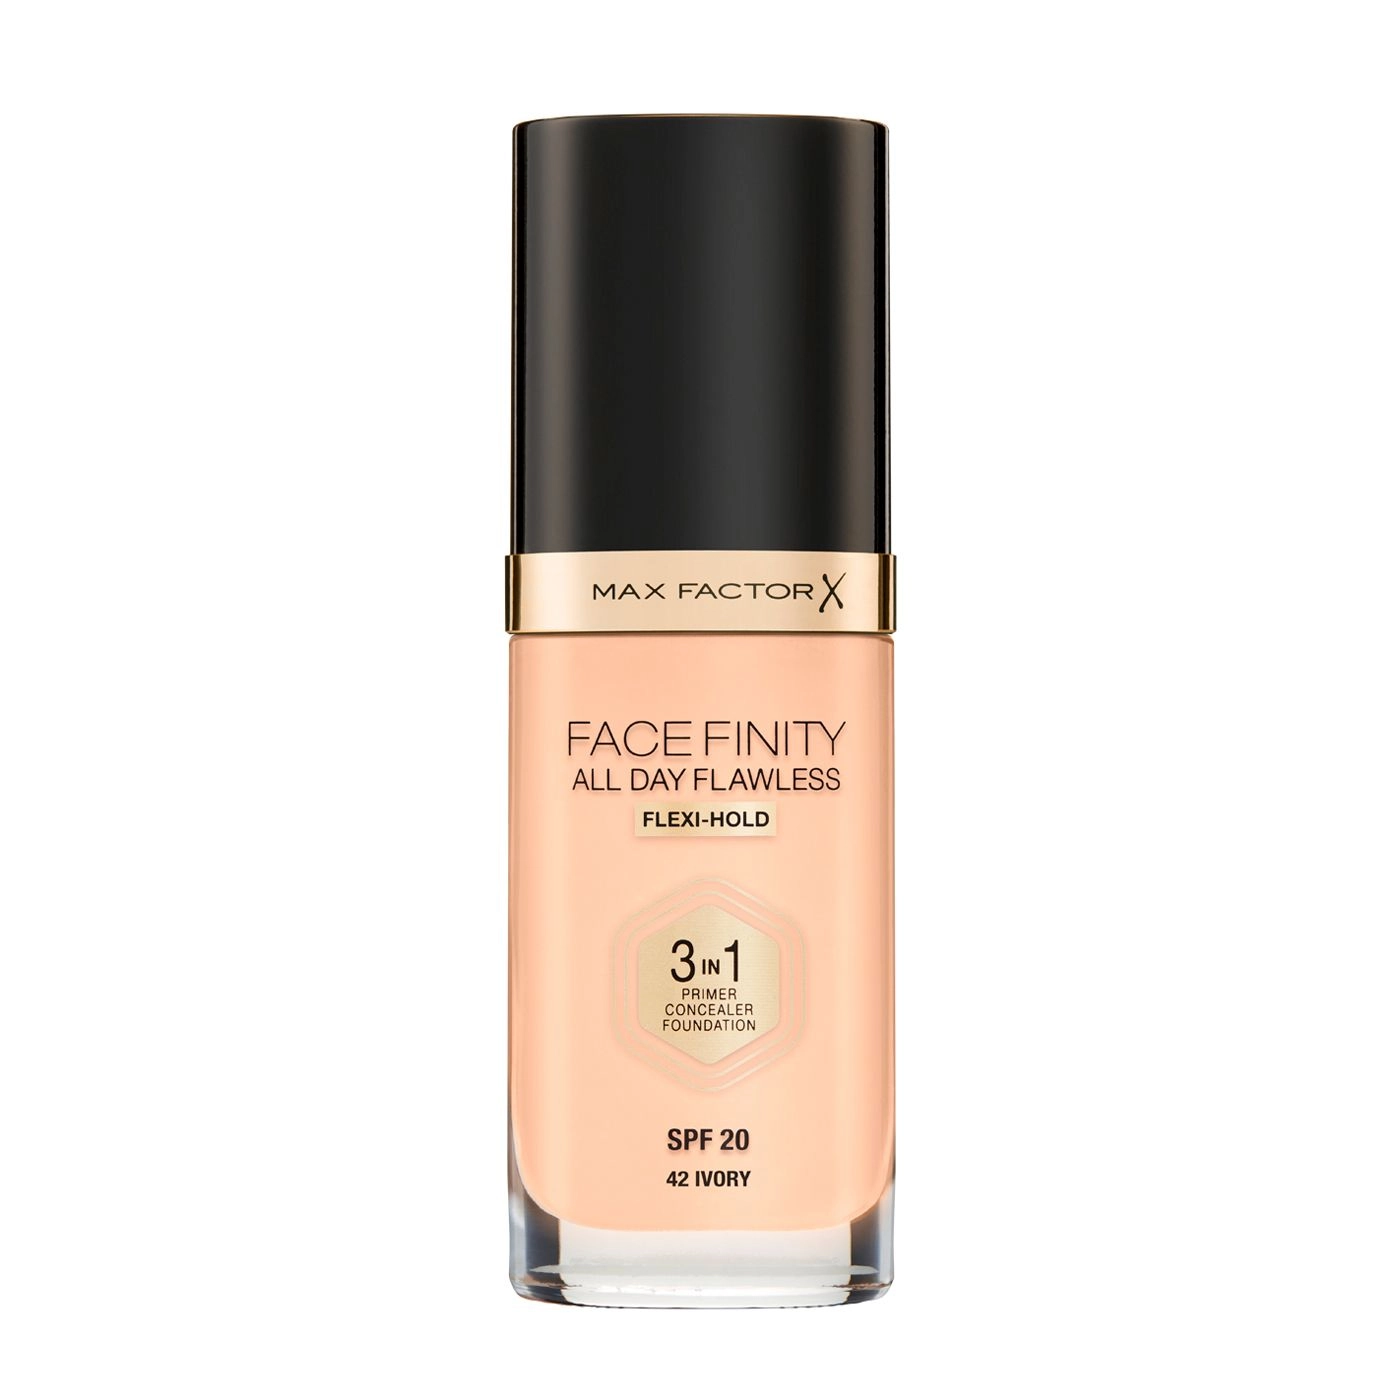 Max Factor Тональна основа для обличчя Facefinity All Day Flawless 3 in 1, SPF 20, 42 Ivory, 30 мл - фото N1